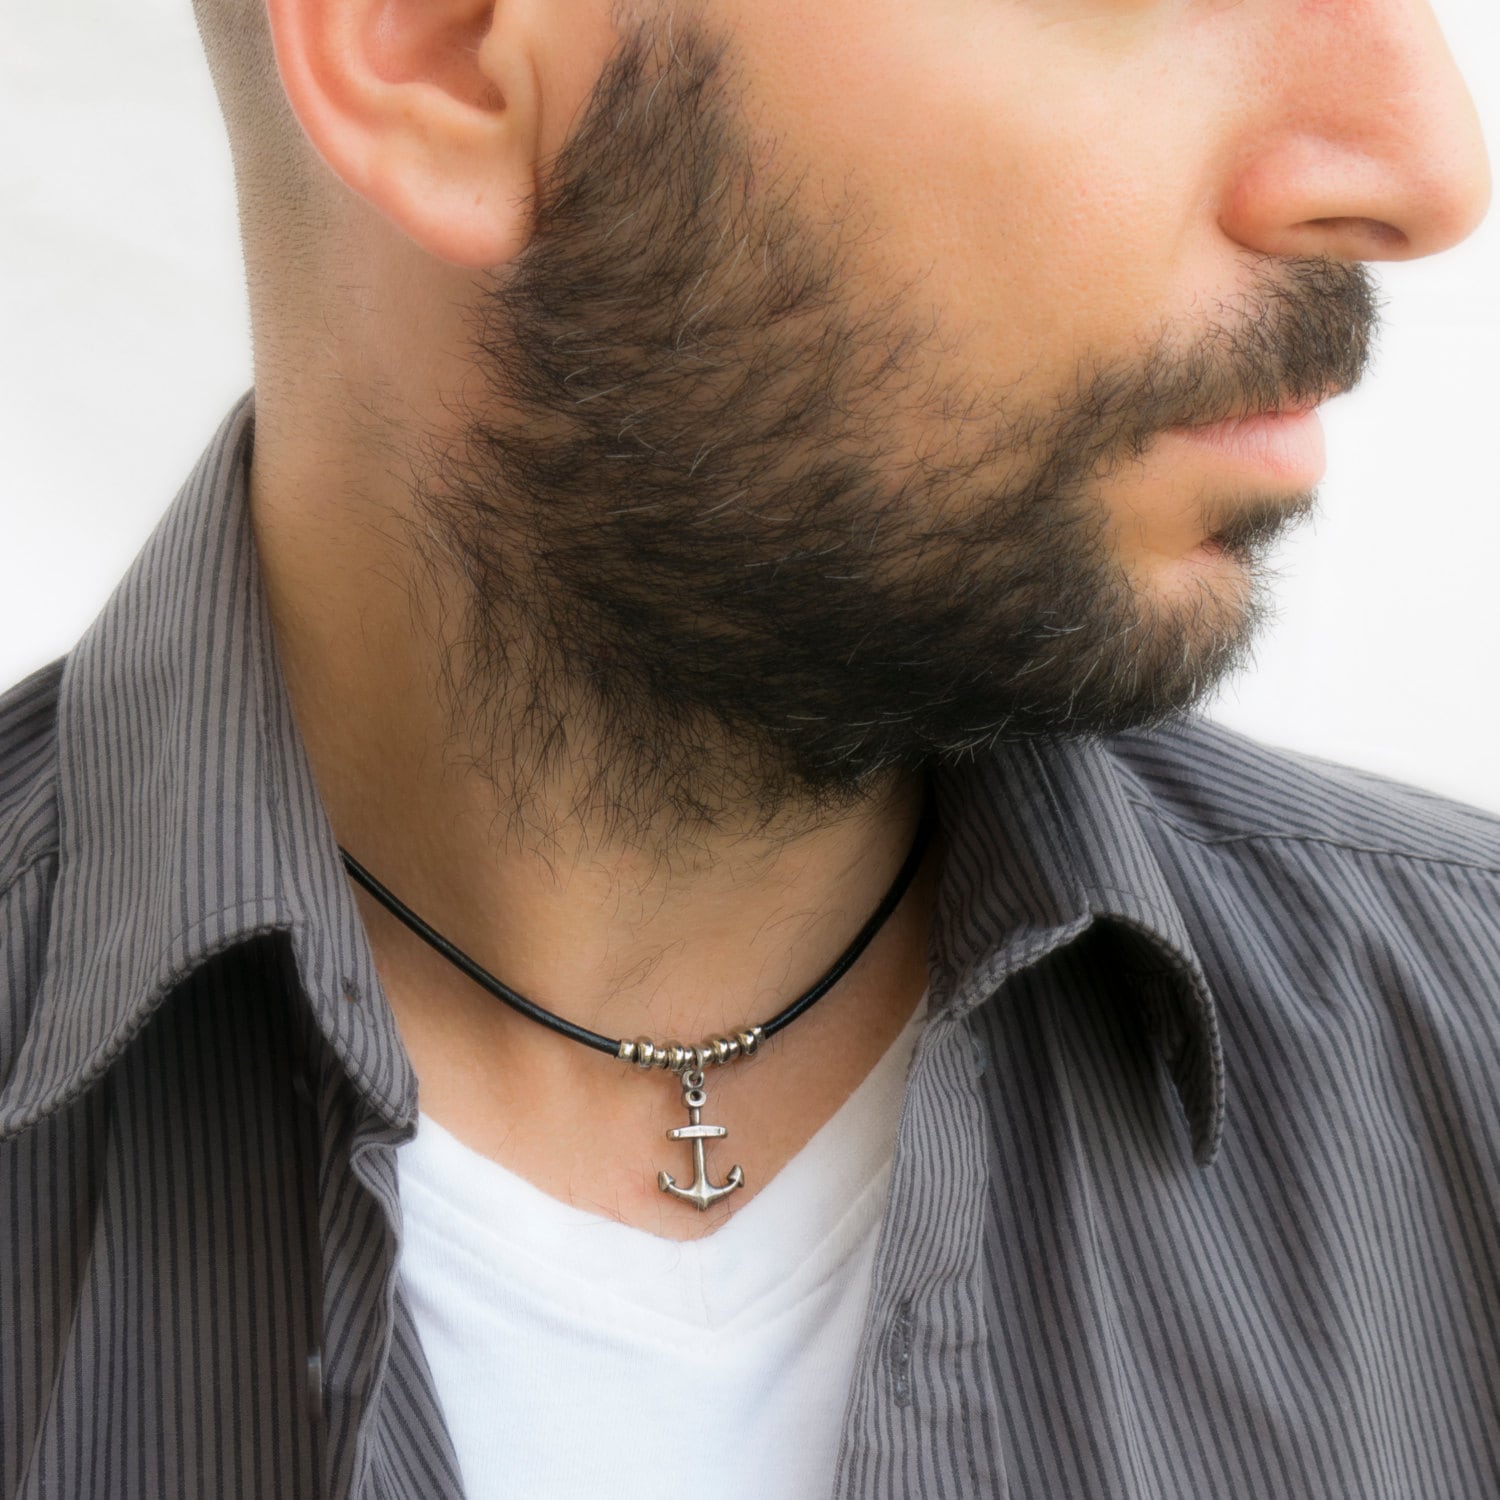 Black leather choker necklace for men with Jade and silver beads - JoyElly